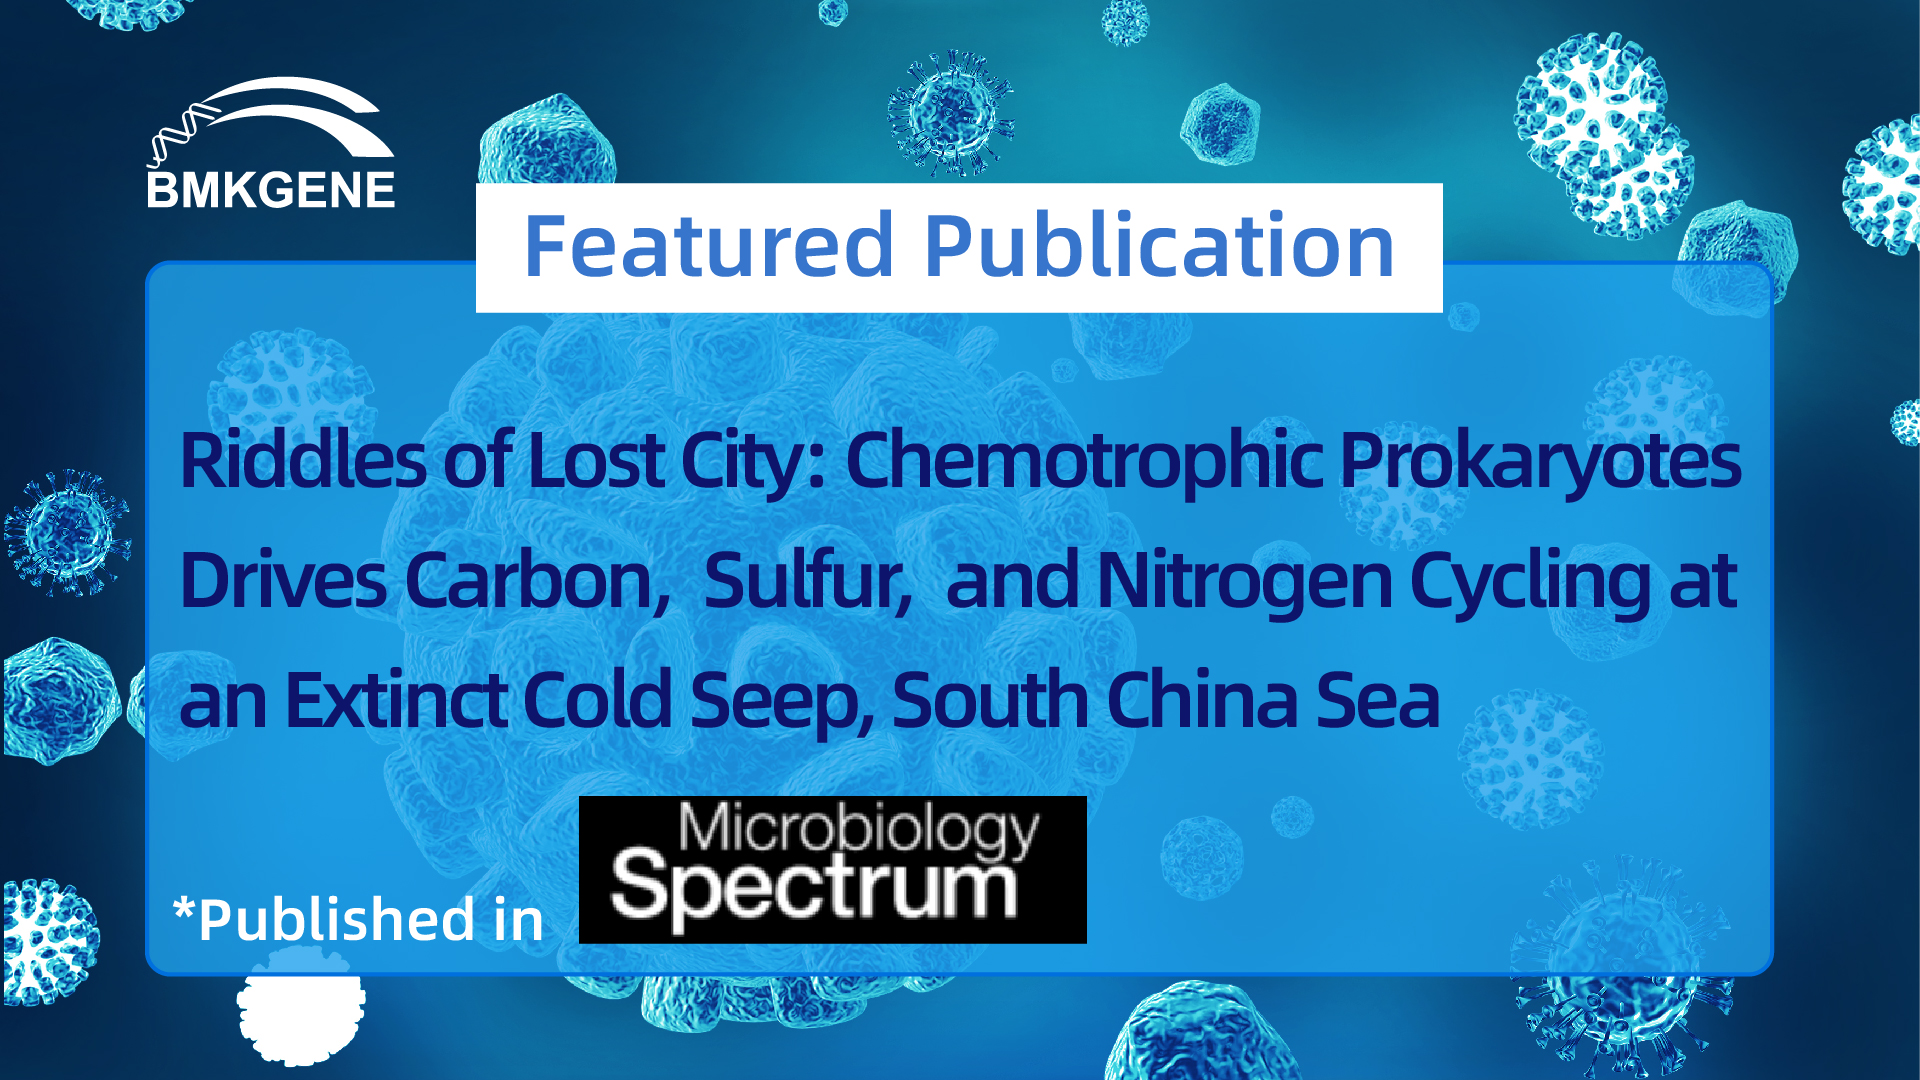 Featured Publication—Riddles of Lost City: Chemotrophic Prokaryotes Drives Carbon, Sulfur, and Nitrogen Cycling at an Extinct Cold Seep, South China Sea